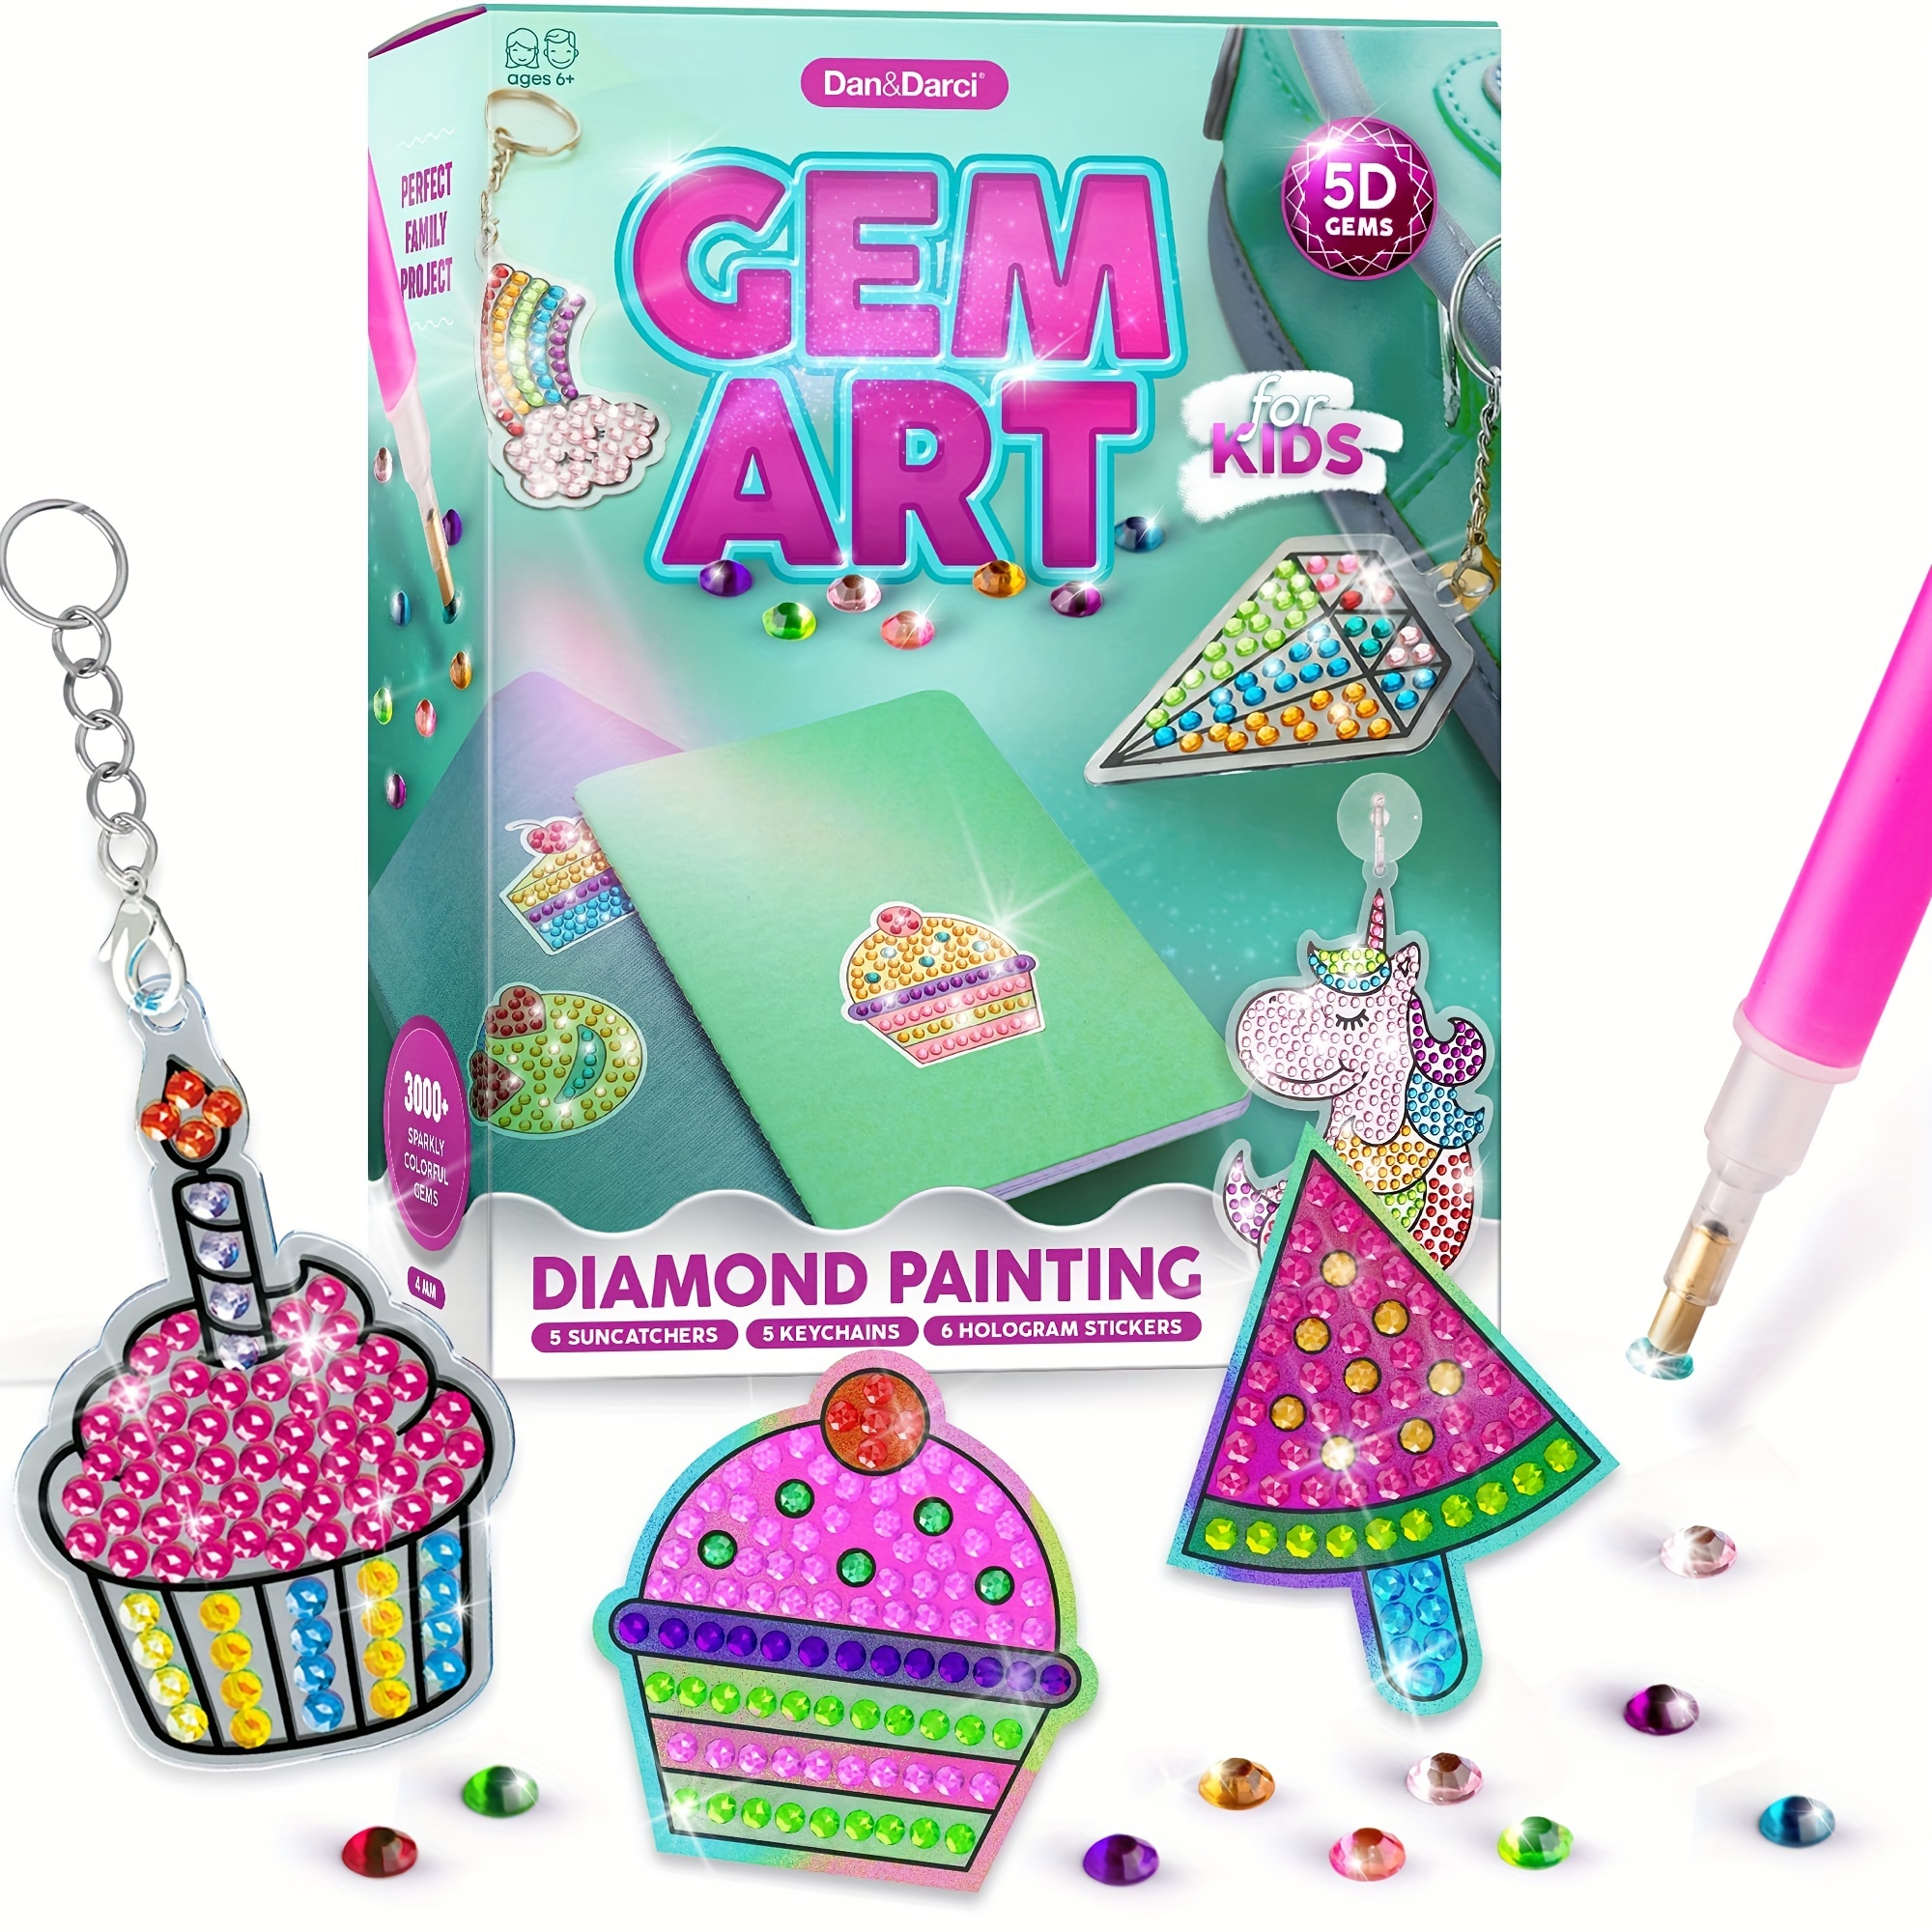 Rock Painting Kit For Kids, Stones Painting Diy Supplies Kit With Marker  Pens, Theme Creativity Arts And Crafts Gifts For Boys Girls Age 3 -12 Years  Old, Christmas Gifts For Kids 